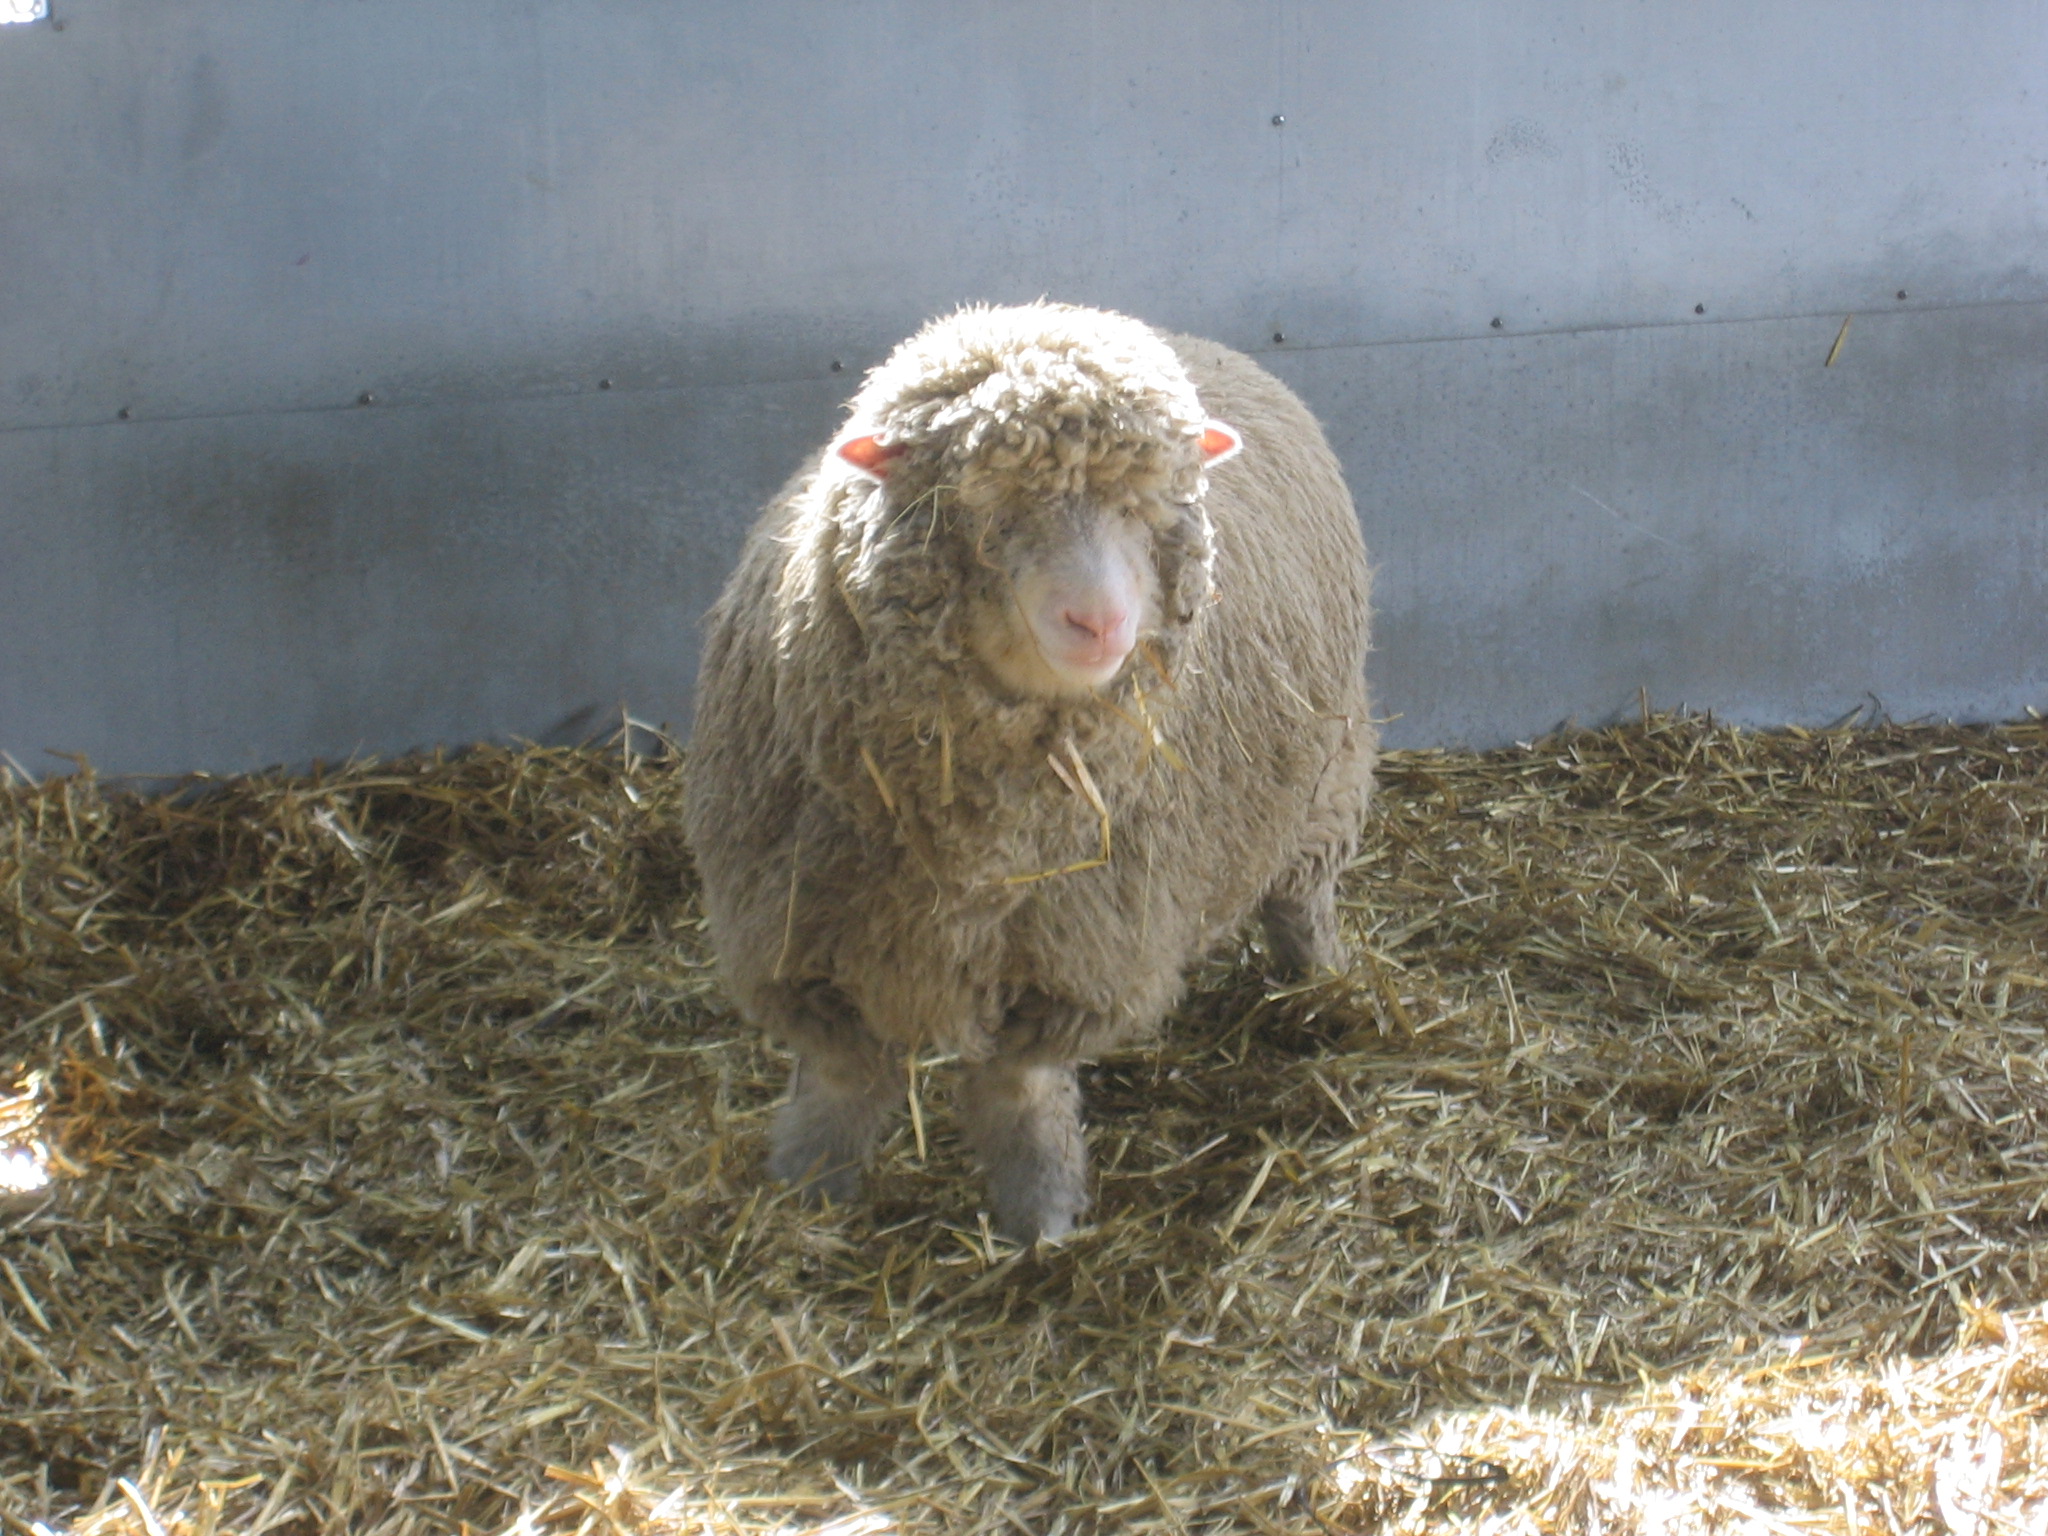 this is a sheep standing in a barn